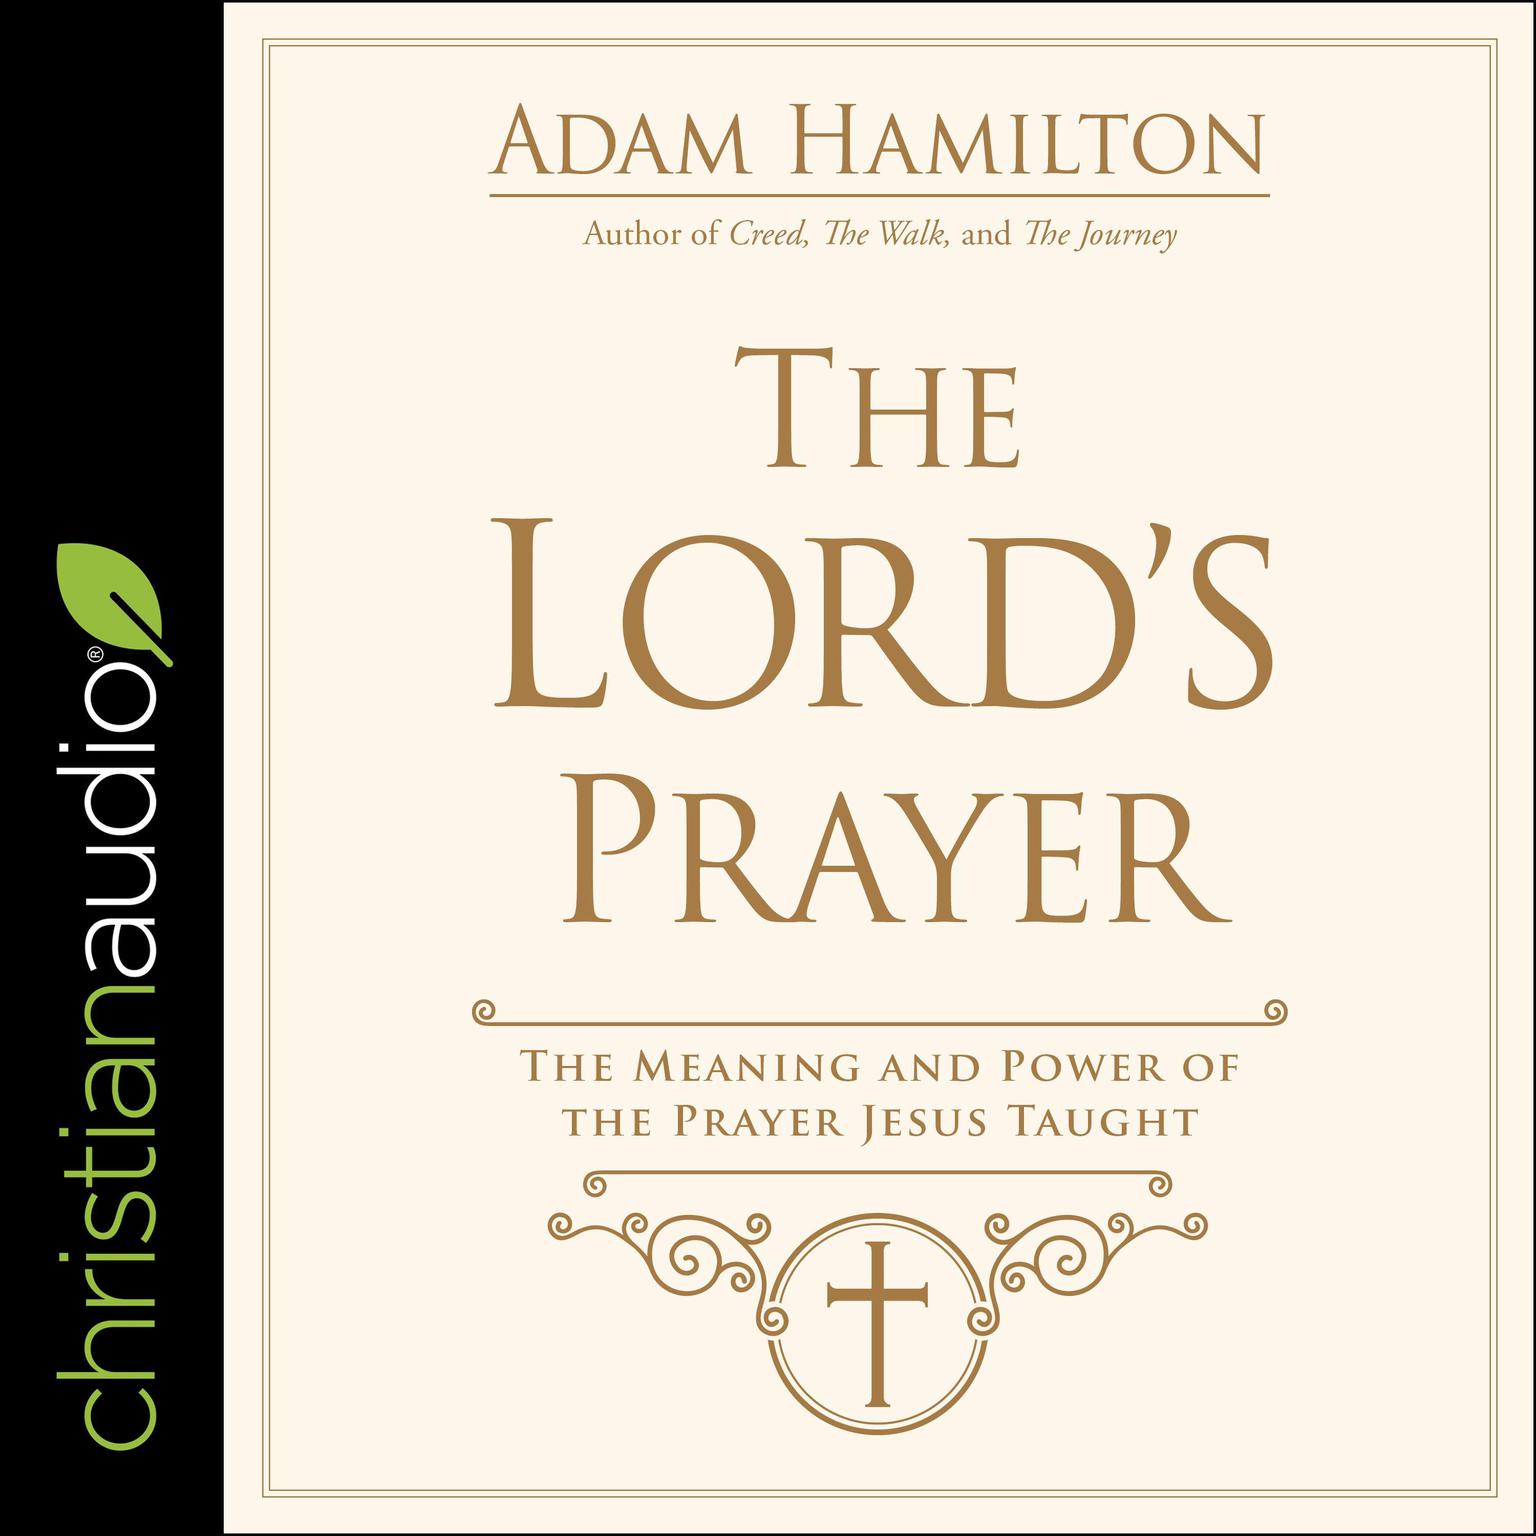 The Lords Prayer: The Meaning and Power of the Prayer Jesus Taught Audiobook, by Adam Hamilton